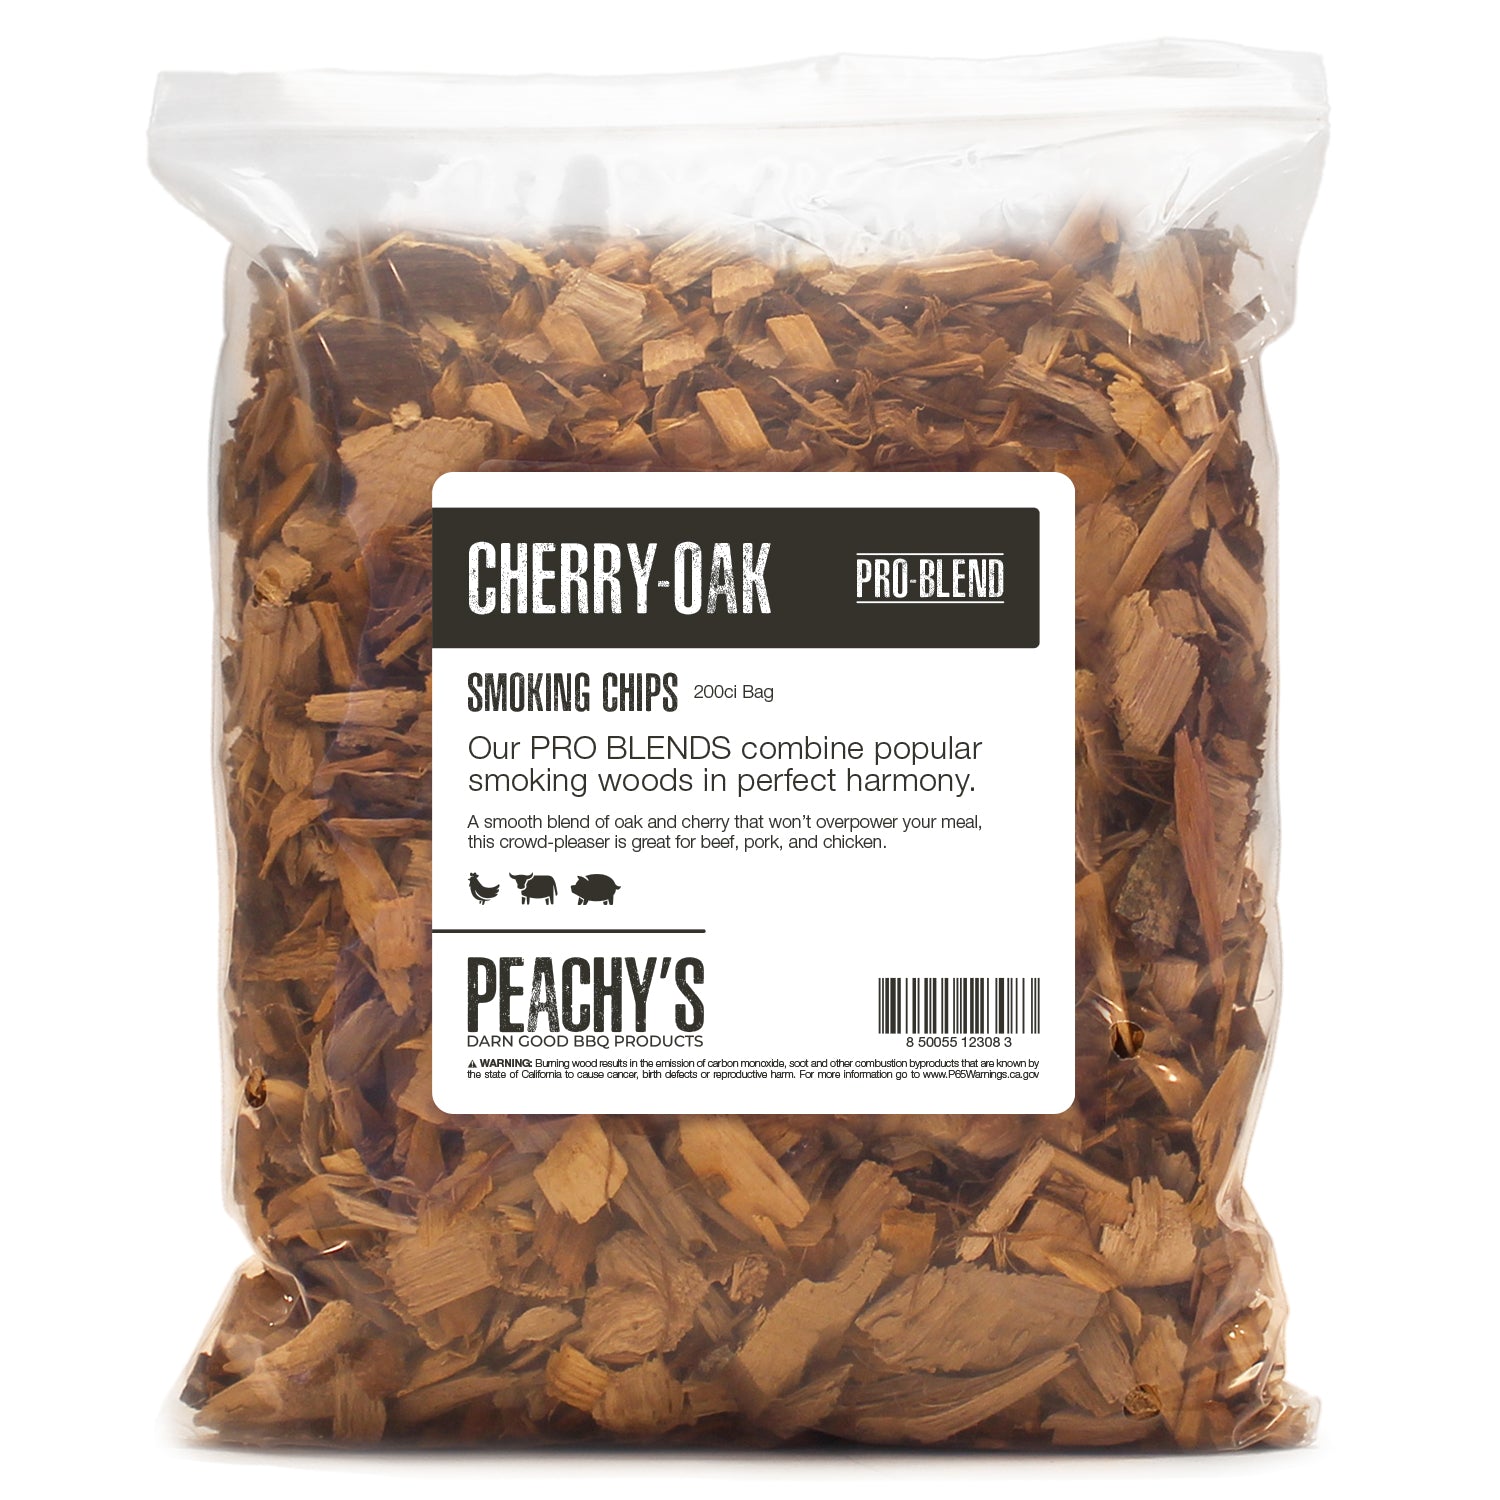 CHERRY+OAK PRO-BLEND Chips | 200ci Bag of Premium Smoking Woods by PEACHY'S